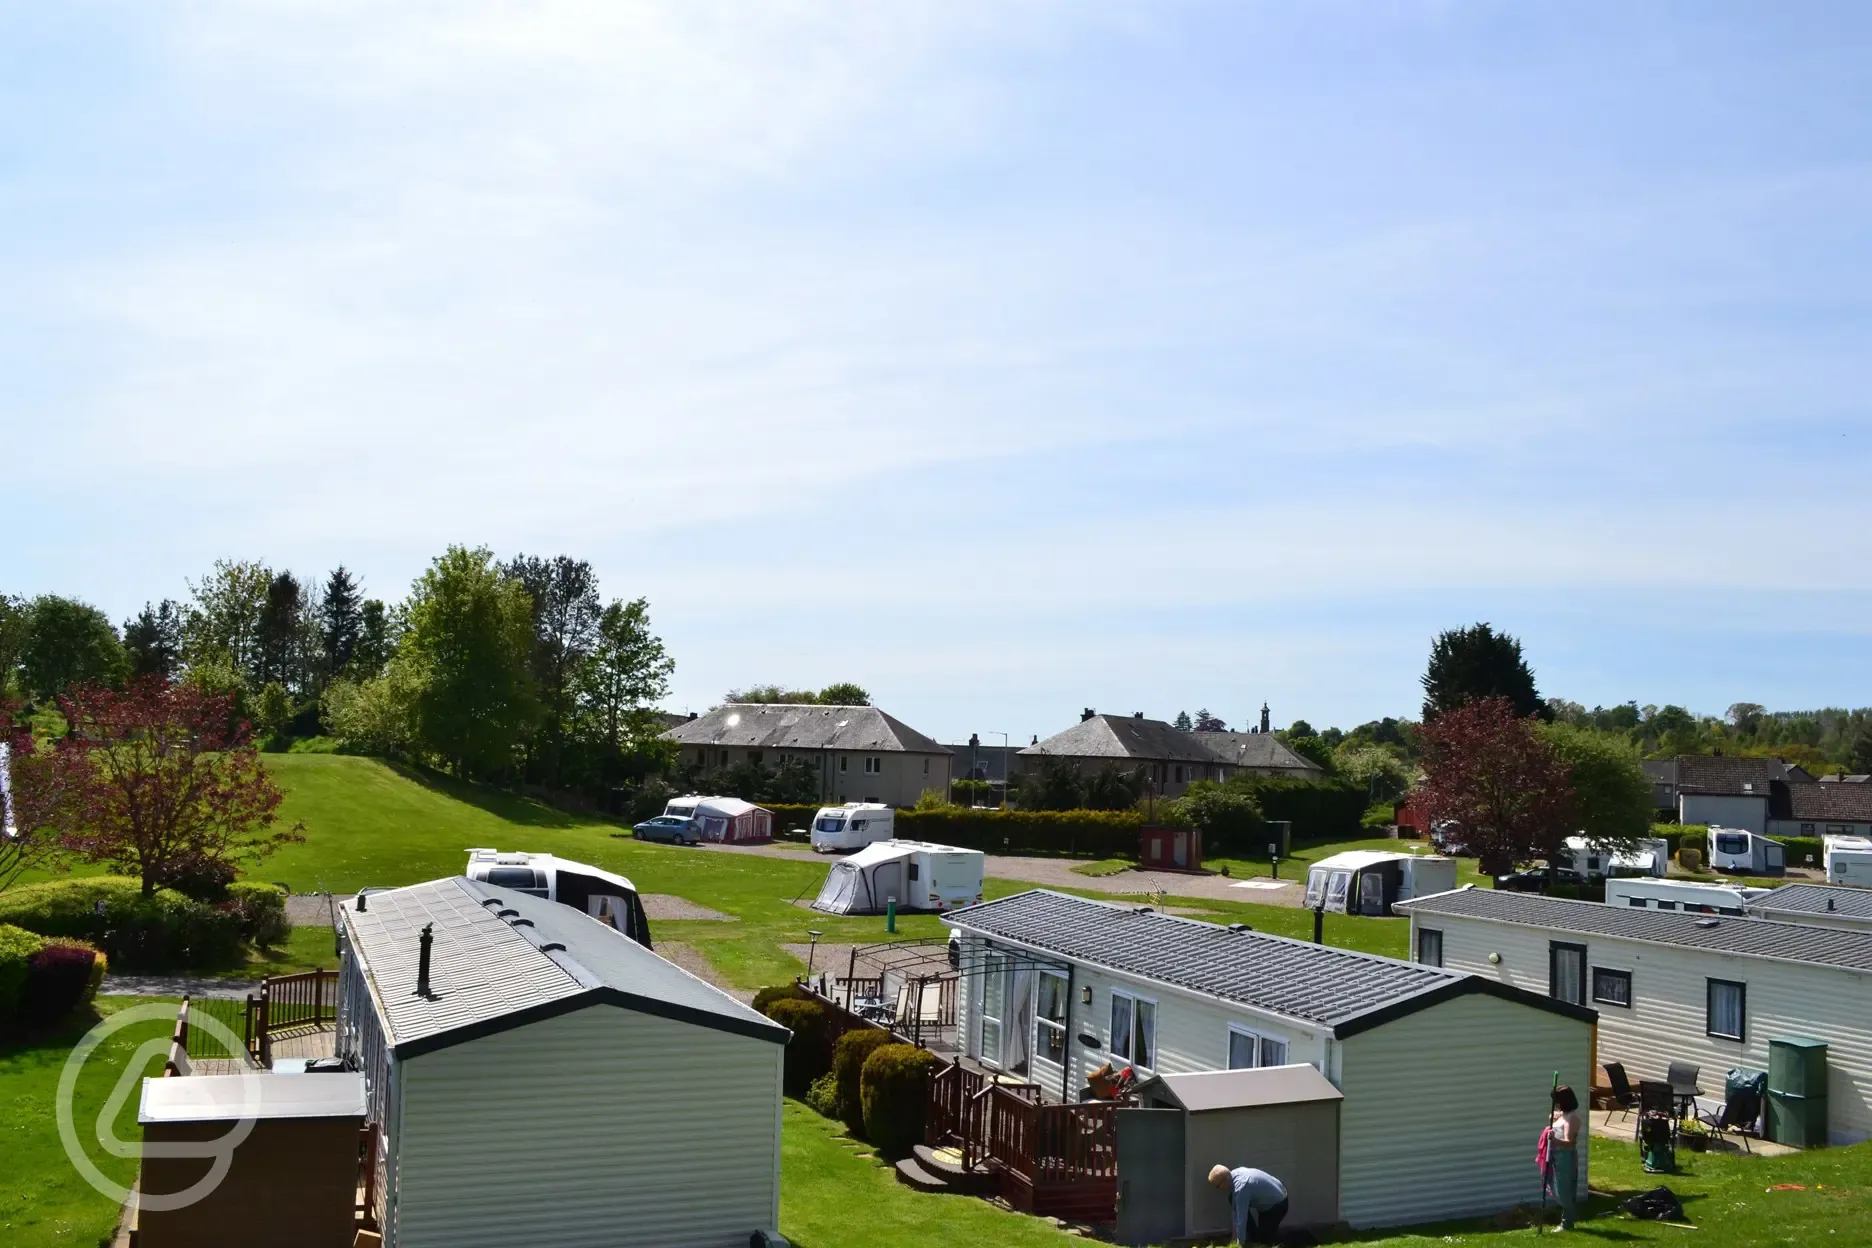 View of Blairgowire Holiday Park from Caravans